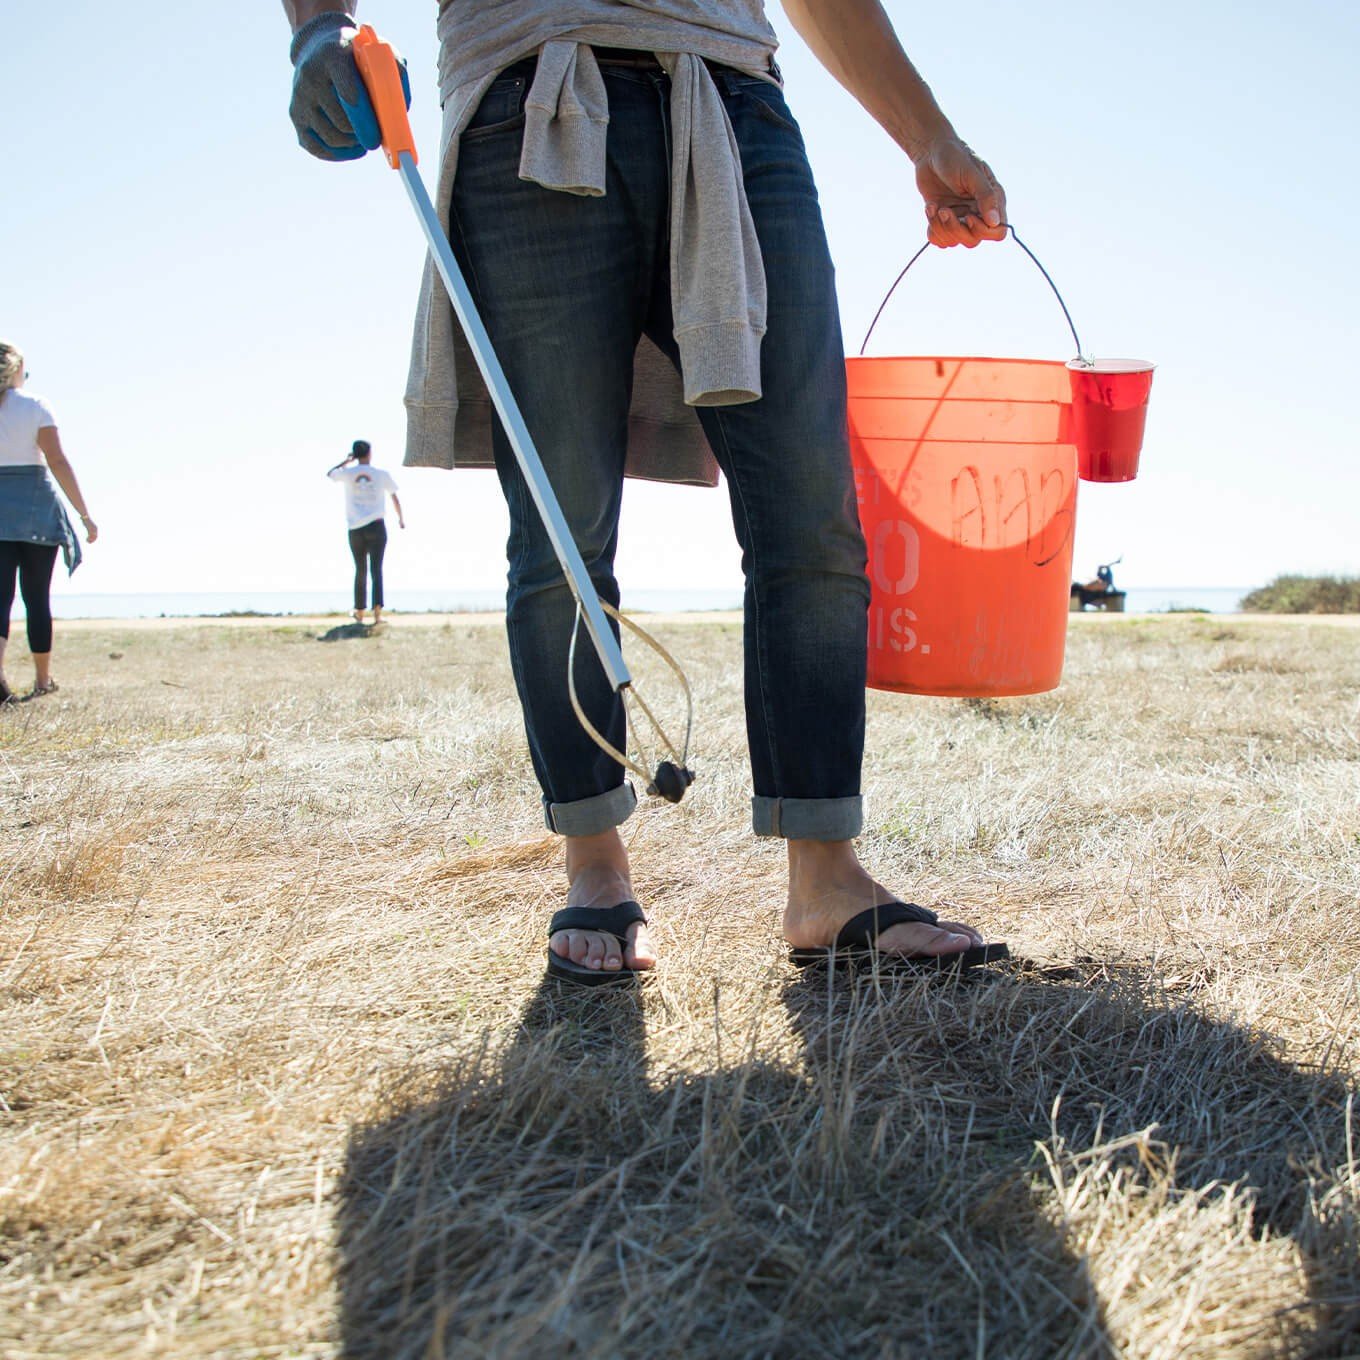 programs-cleanups on a grassy field